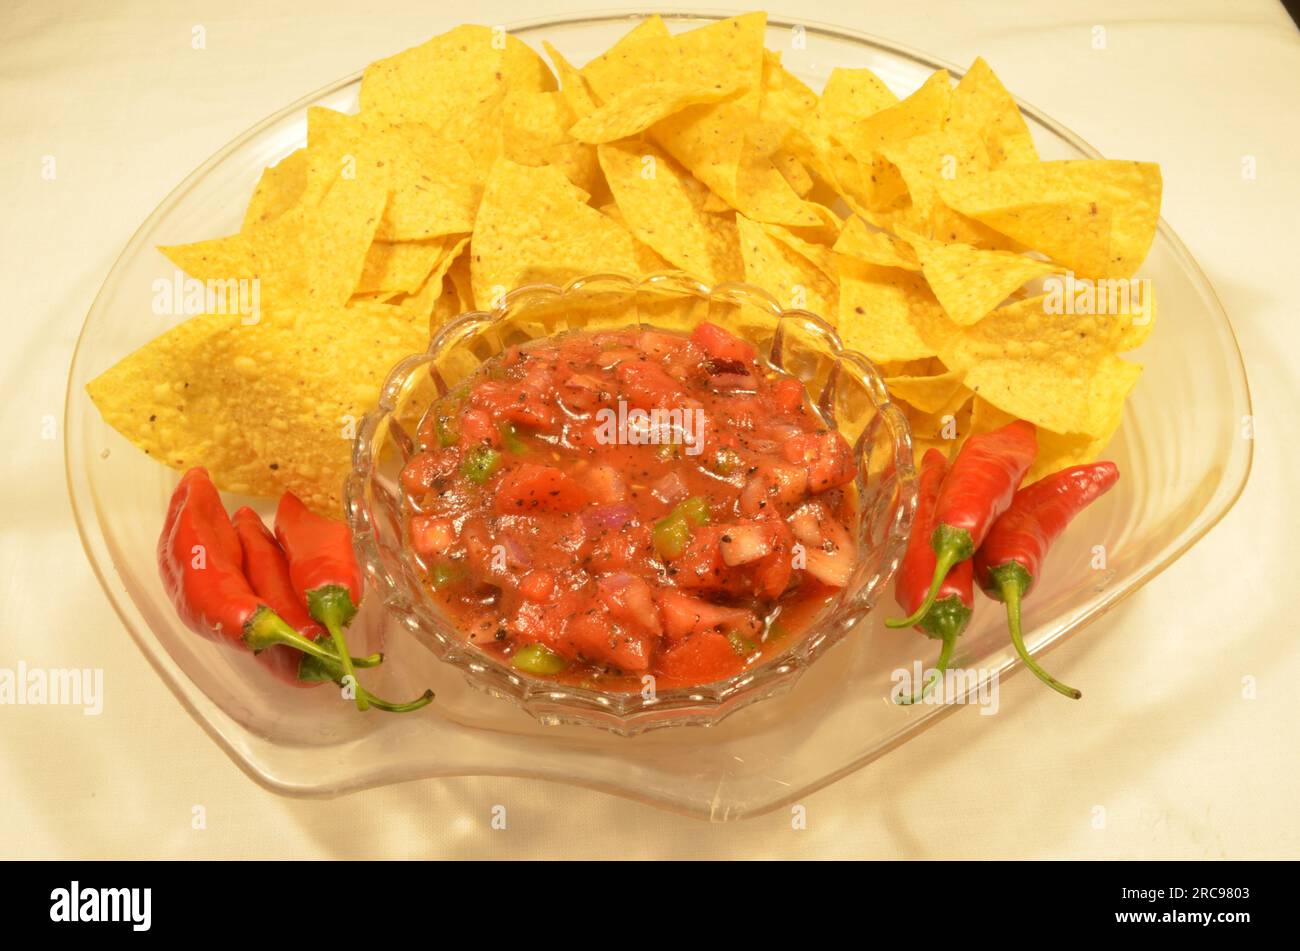 Mexican Salsa - This traditional Mexican appetizer has been pleasing many people around the world! Stock Photo